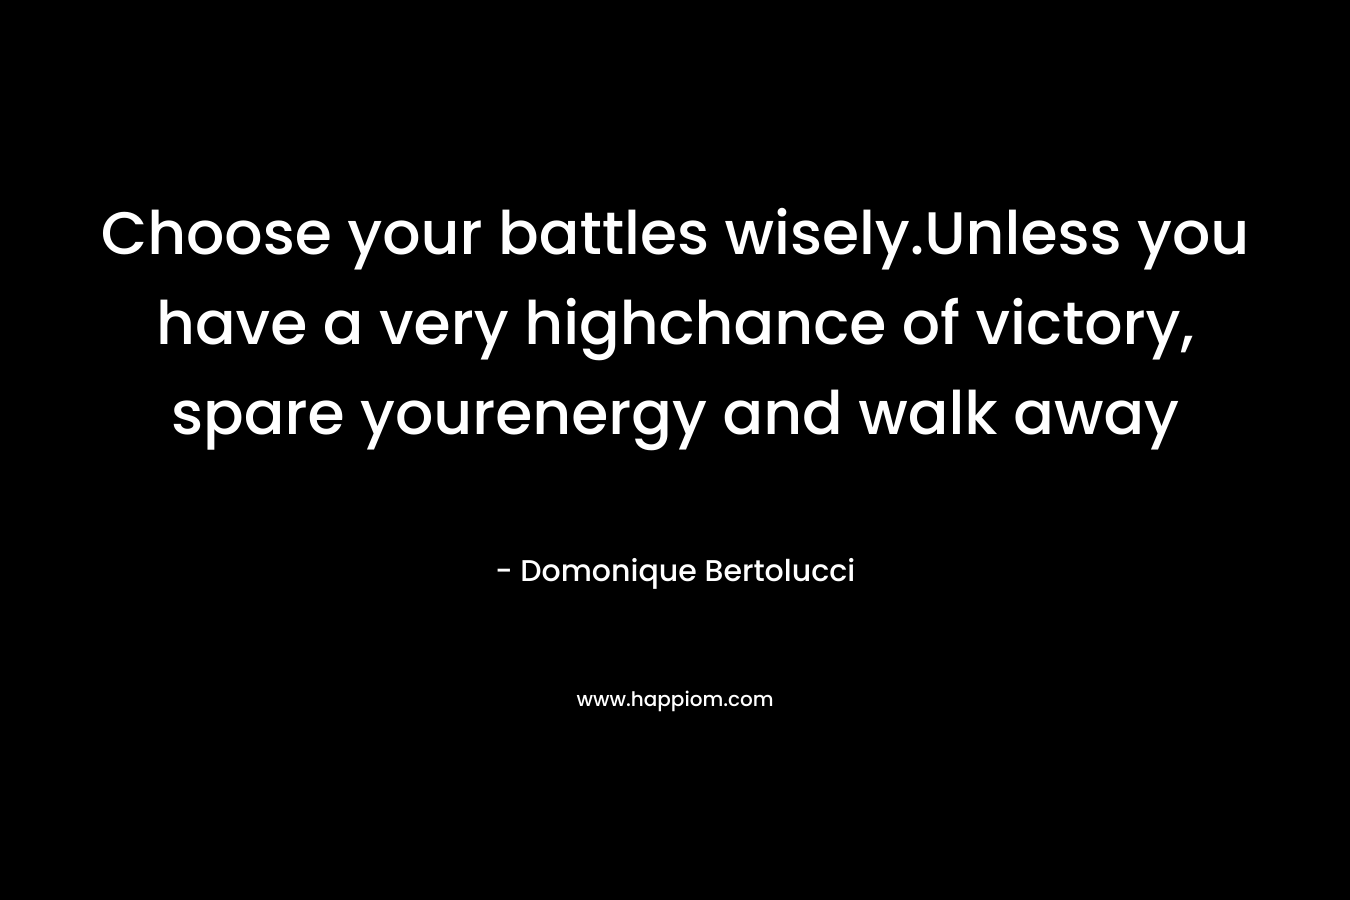 Choose your battles wisely.Unless you have a very highchance of victory, spare yourenergy and walk away